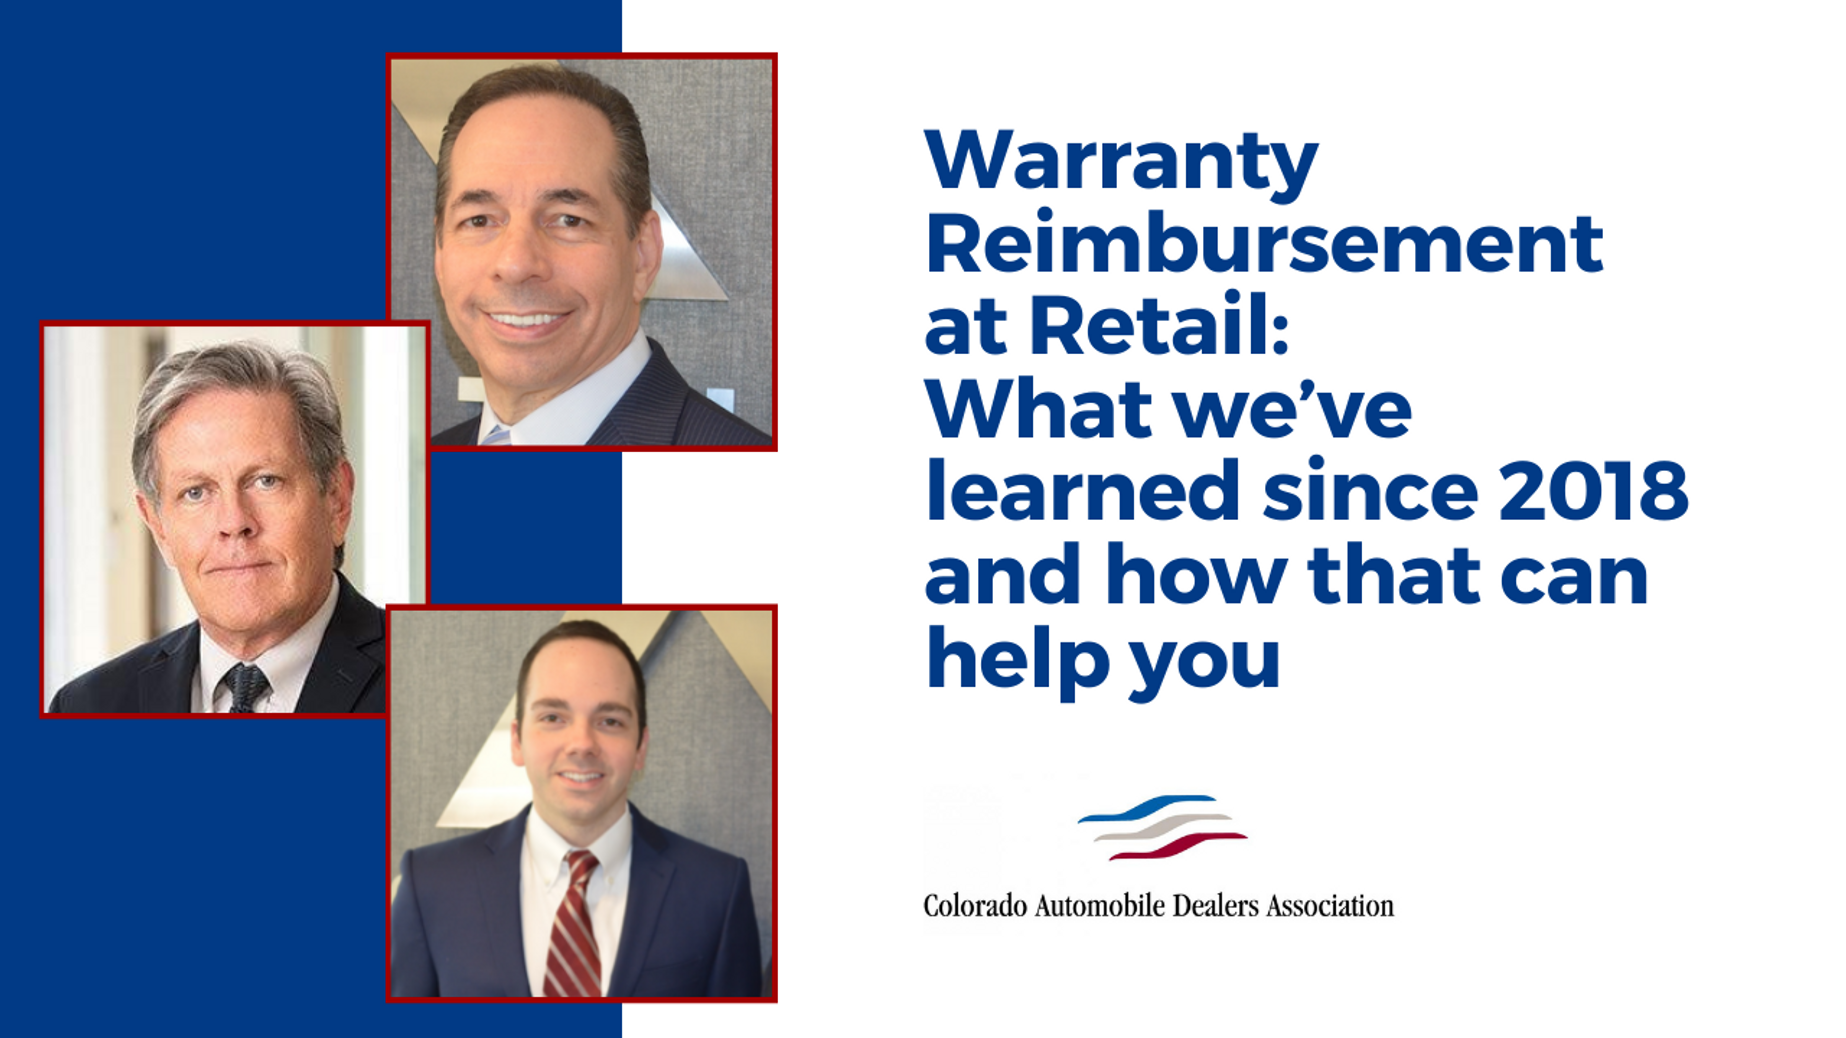 (Pre-Purchased) Warranty Reimbursement at Retail: What we've learned since 2018 and how that can help you